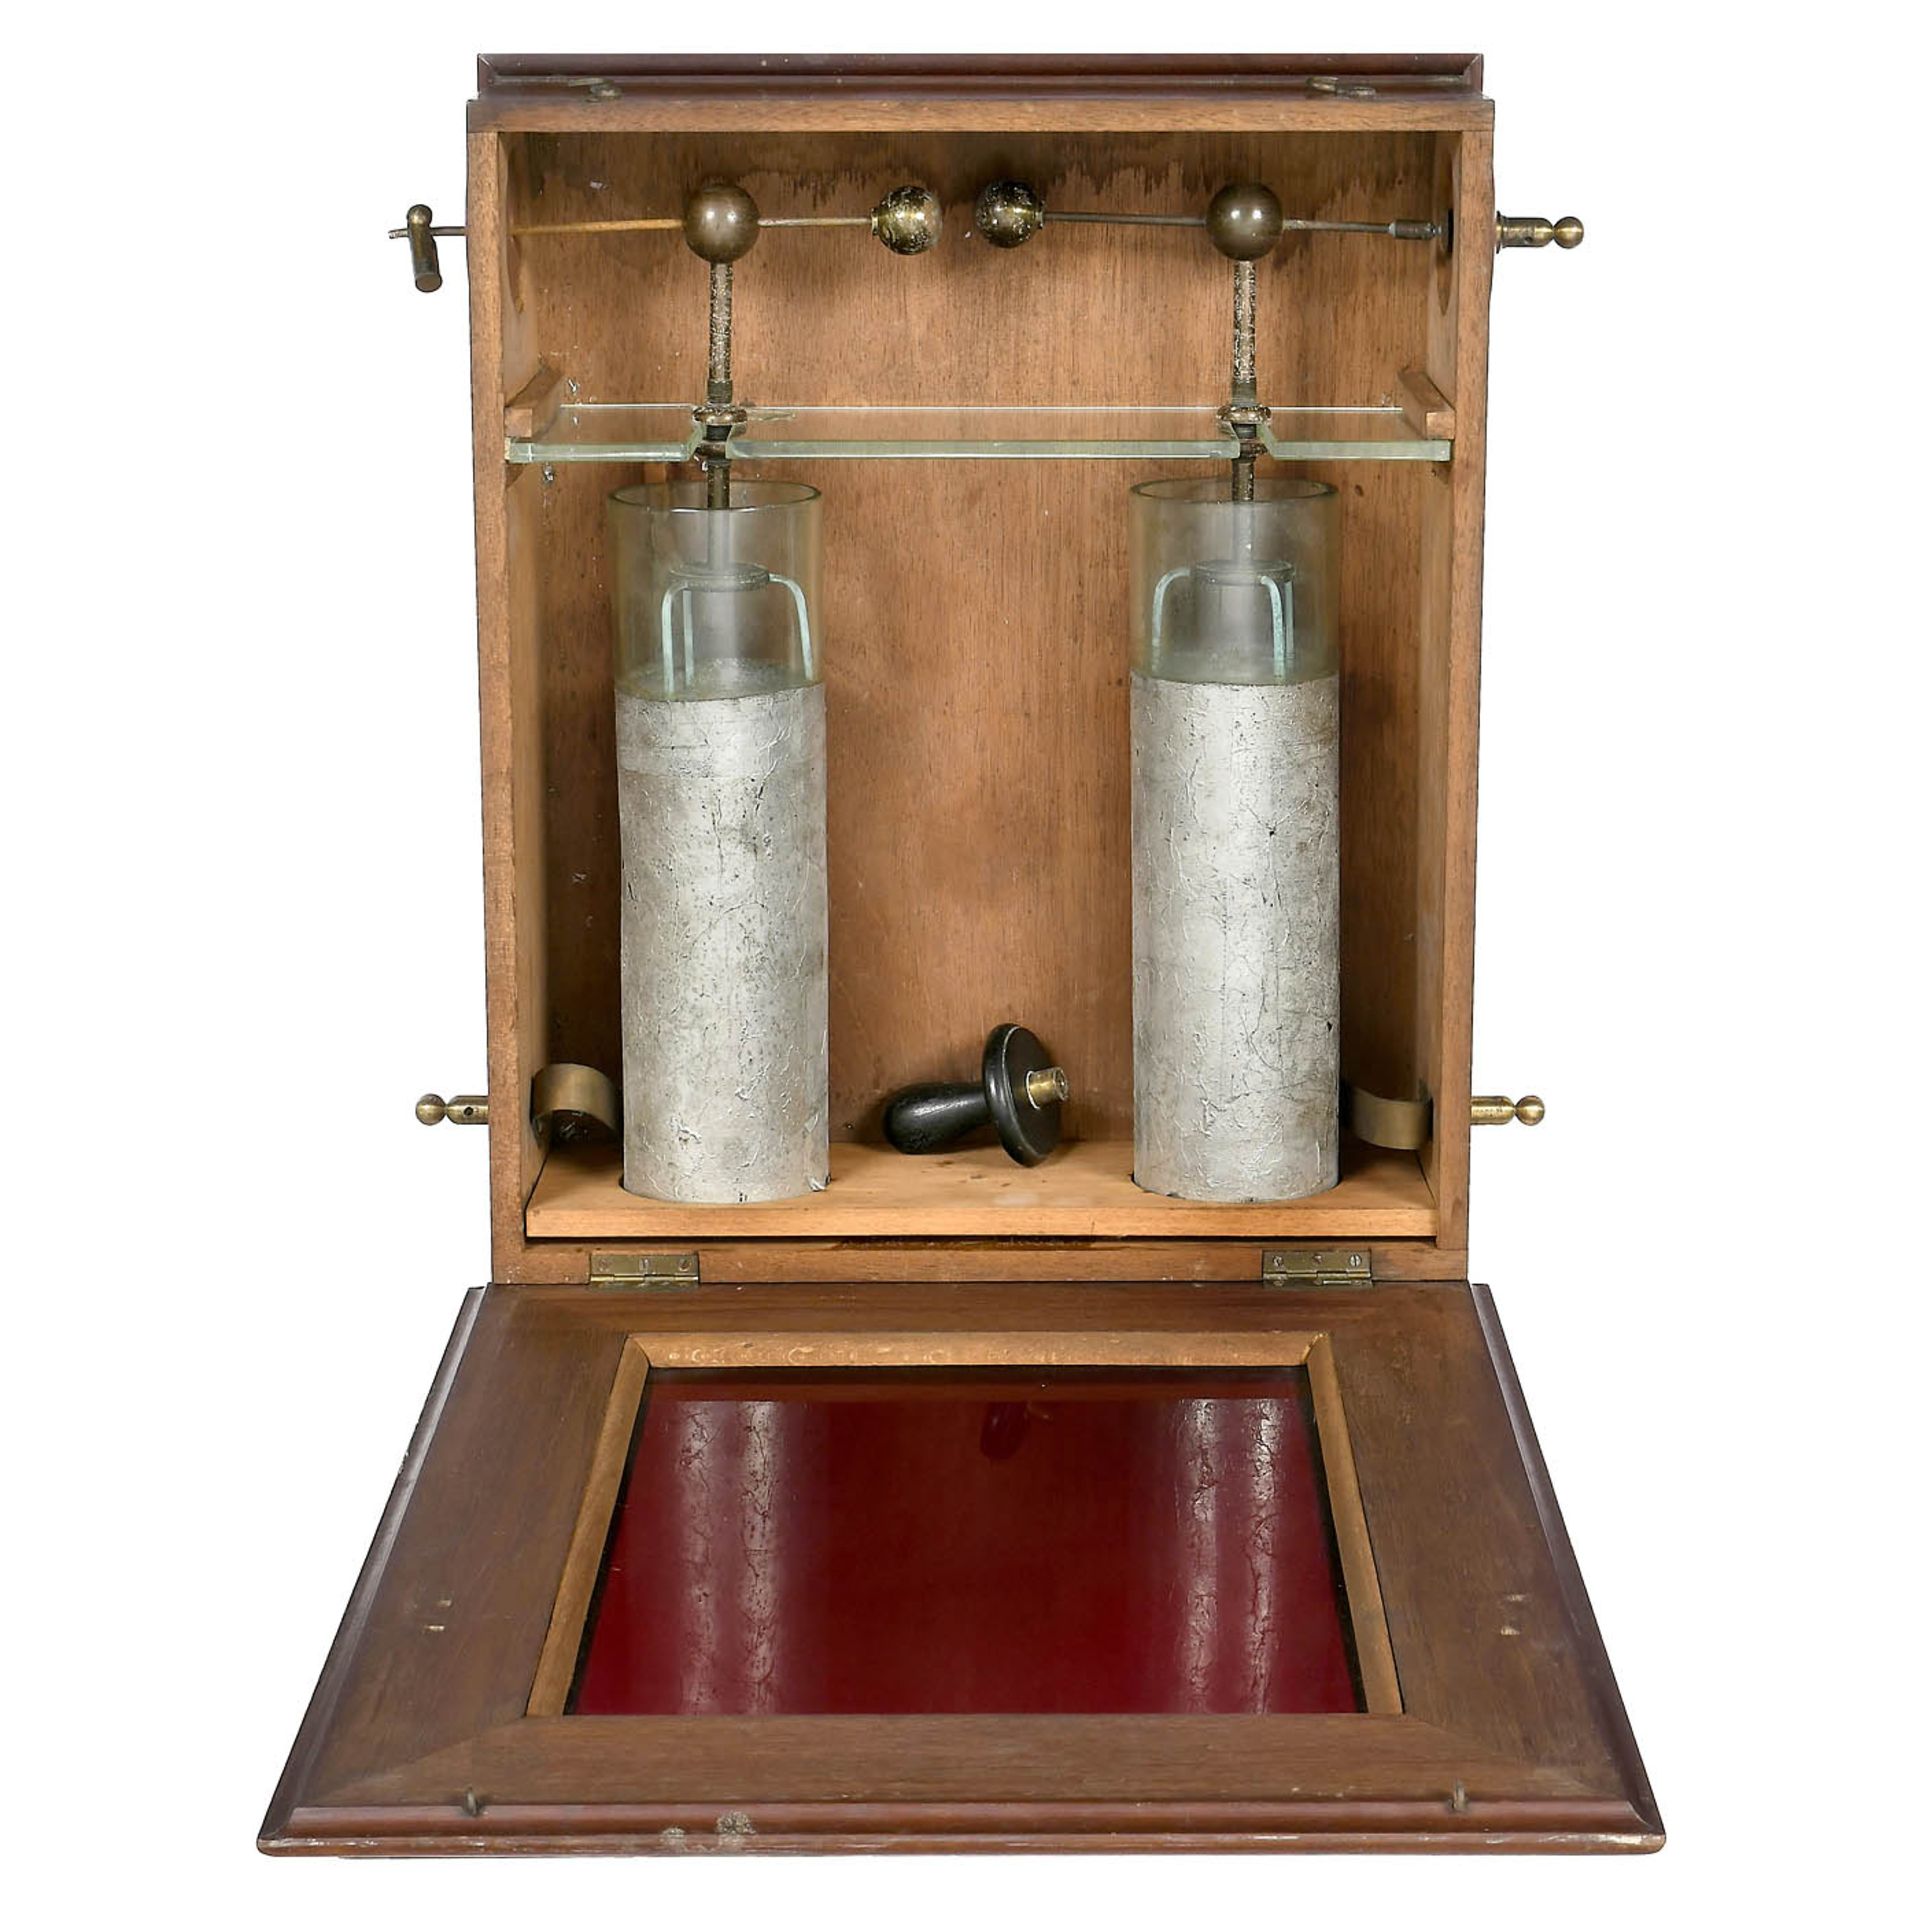 Spark box with Leyden Jars used with an Oudin Resonator, c. 1900